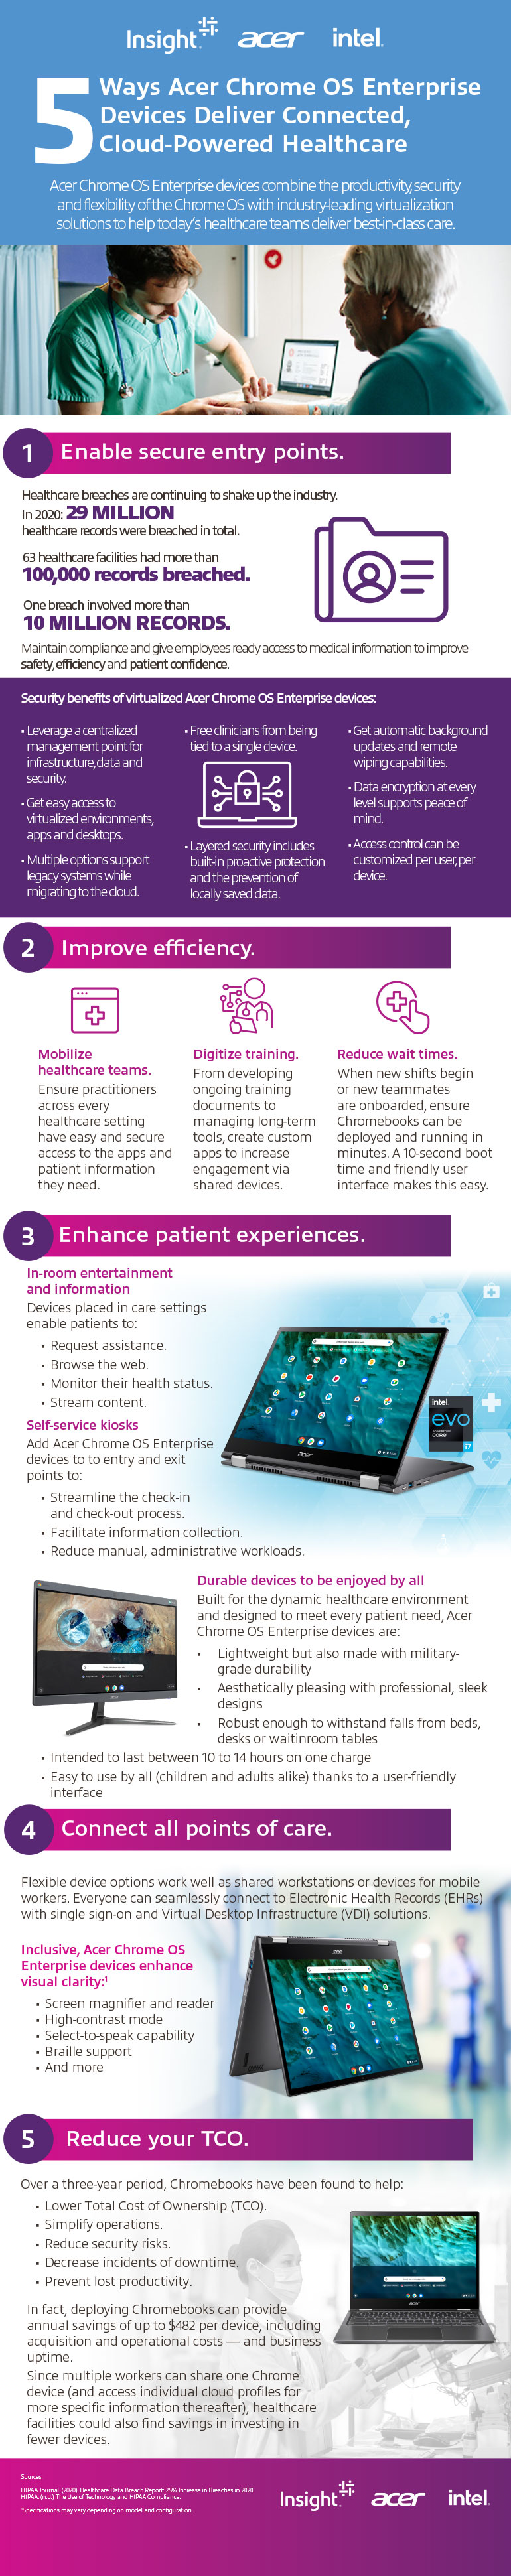 Thumbnail image of 5 Ways Acer Chrome Devices Deliver Connected, Cloud-Powered Healthcare infographic transcribed below